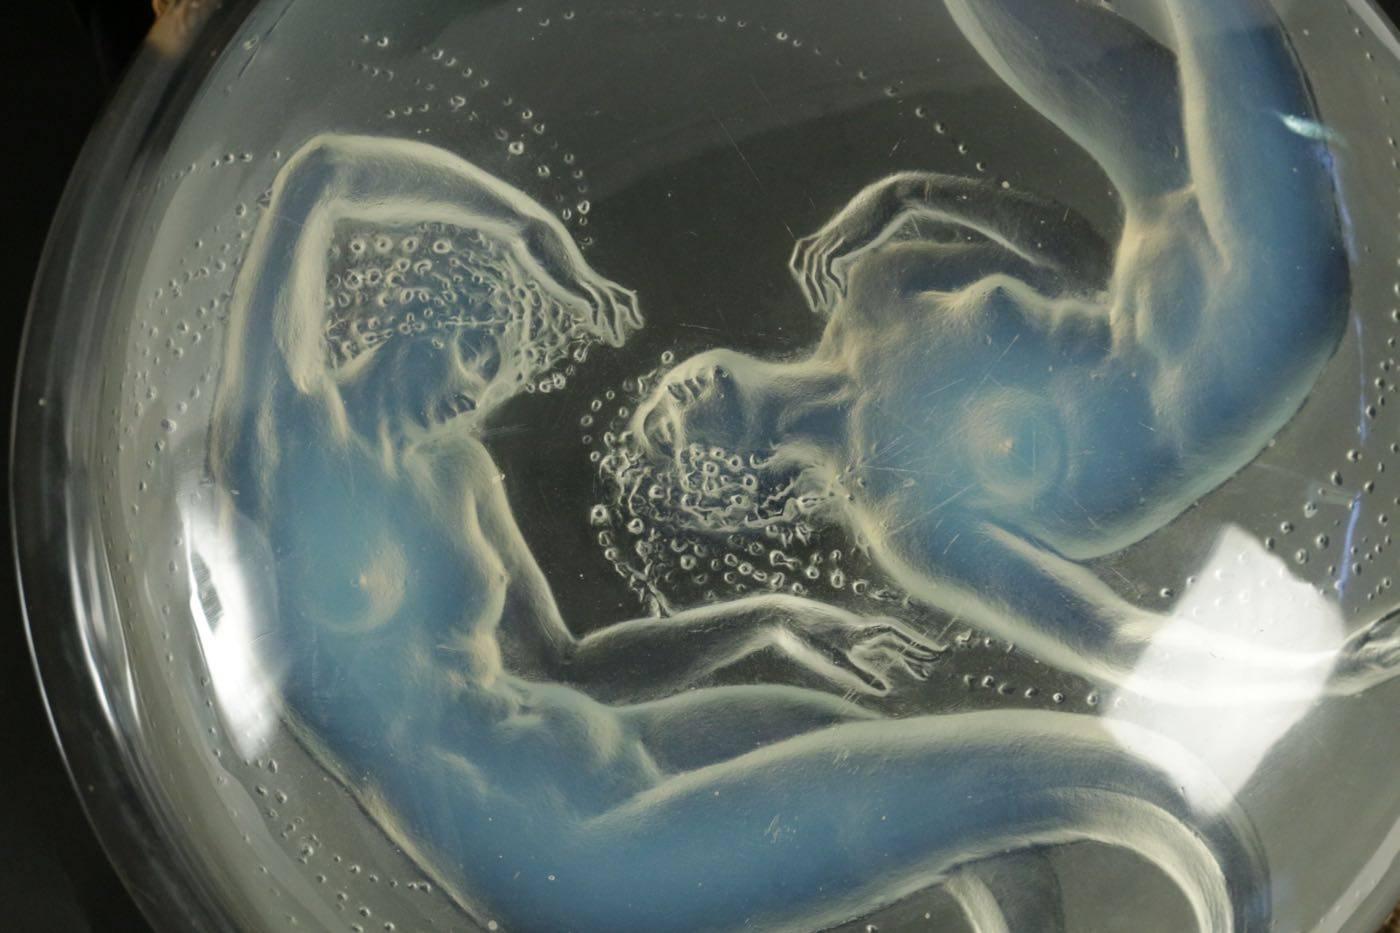 Rene Lalique light fixture Deux Sirenes
39 centimetres wide round opalescent glass bowl form featuring two mythical alluring female type siren figures Lalique light fixture suspended from four cords creating opalescent bowl form glass with four